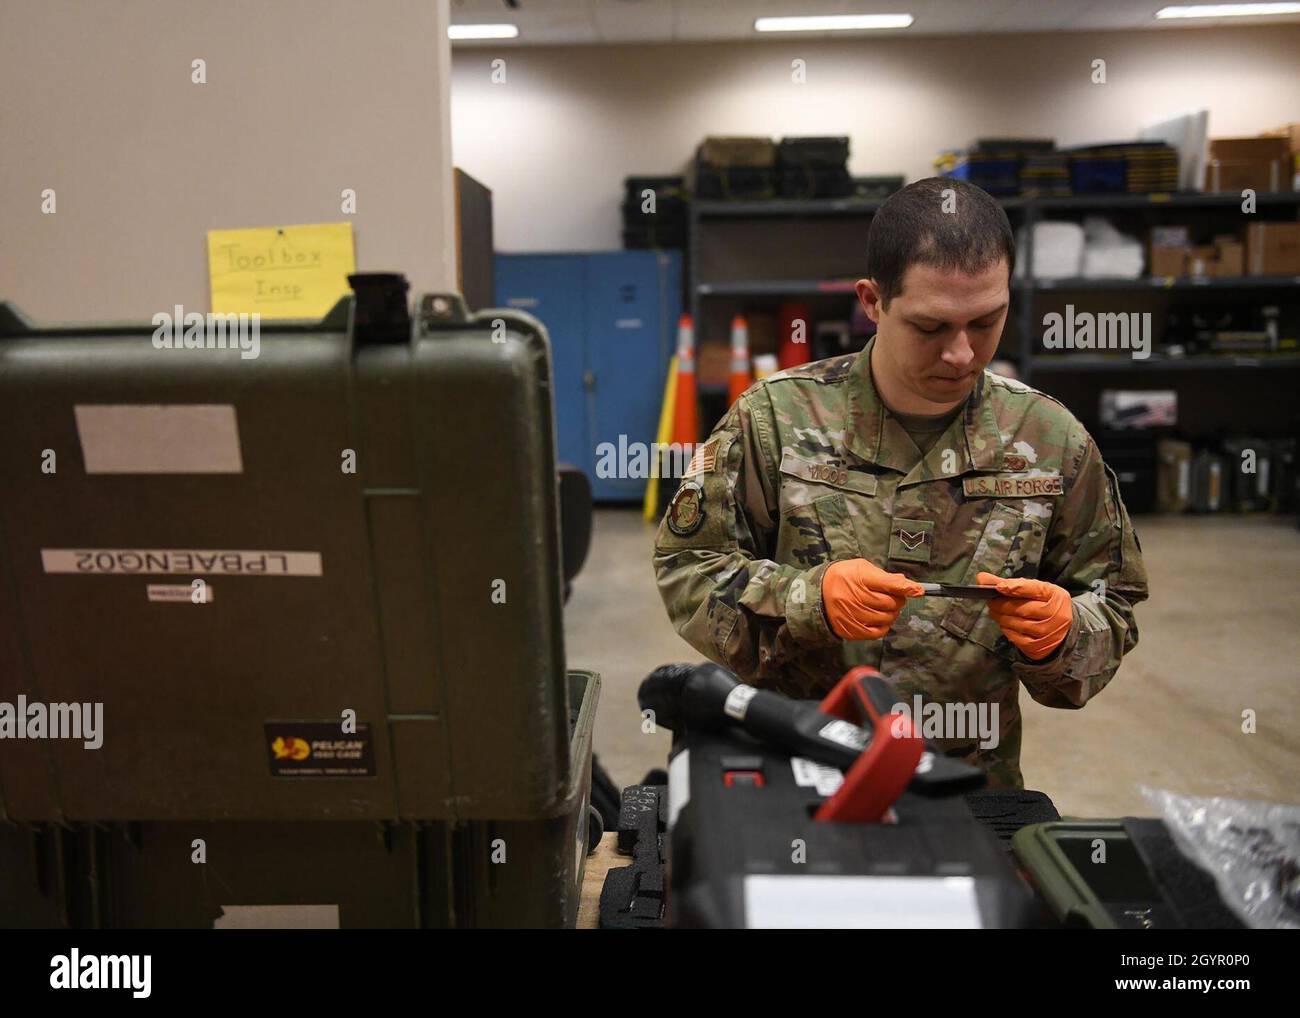 U.S. Air Force Staff Sgt. James Wood, 314th Aircraft Maintenance Squadron support technician, inspects tools for damage at Little Rock Air Force Base, Arkansas, Jan. 22, 2020. Airmen in the support section are responsible for maintaining essential materials, such as tools and protective equipment, needed for the squadron to carry out its duties. (U.S. Air Force photo by Airman 1st Class Jayden Ford) Stock Photo